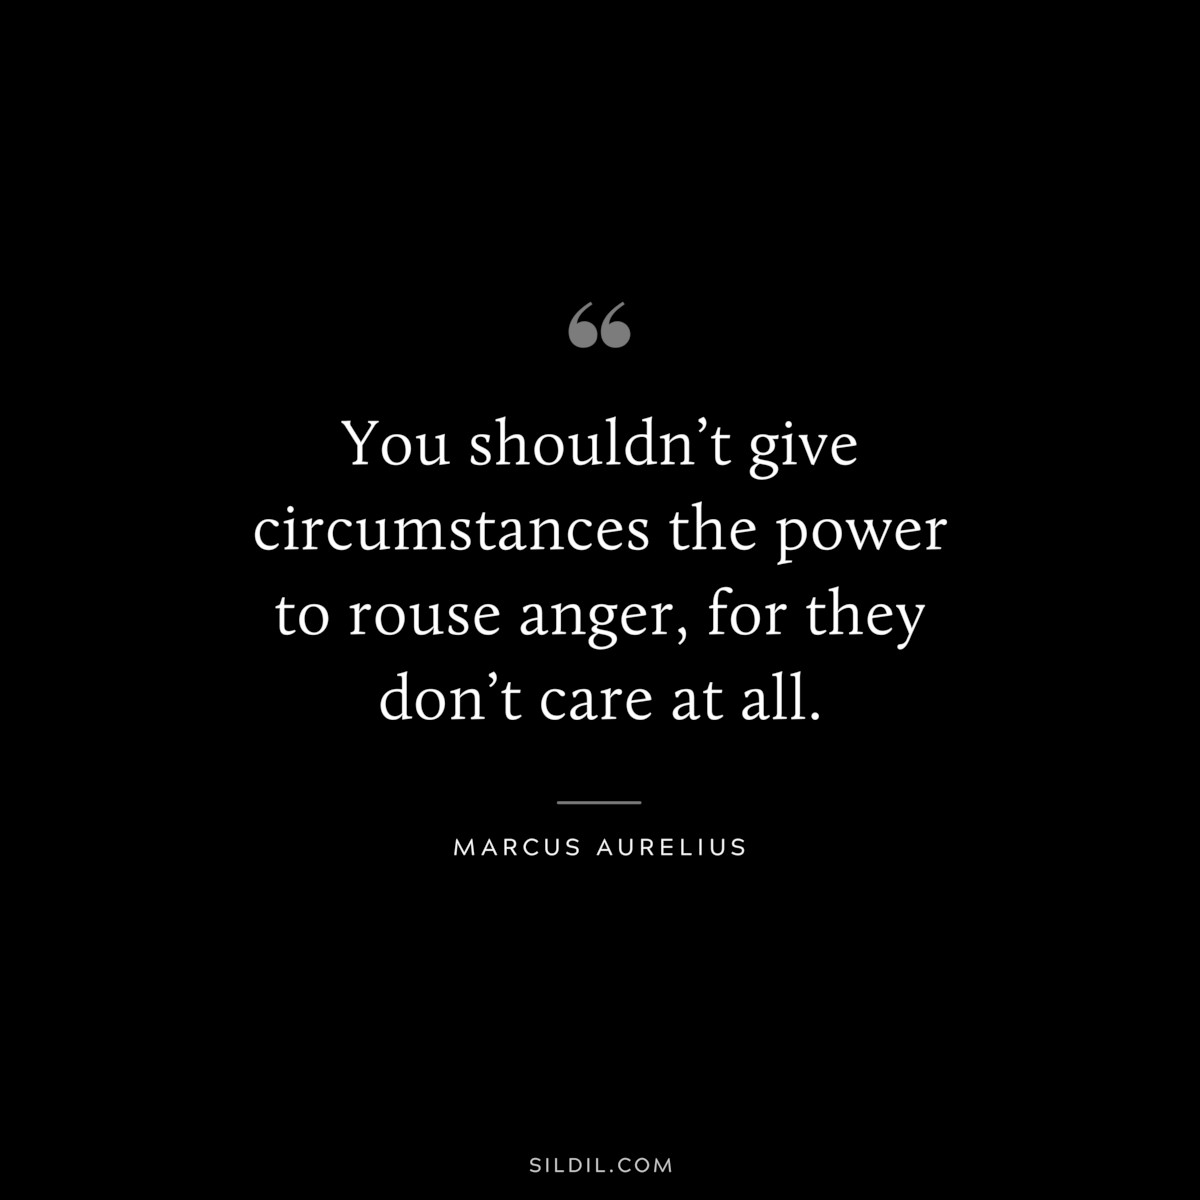 You shouldn’t give circumstances the power to rouse anger, for they don’t care at all. ― Marcus Aurelius